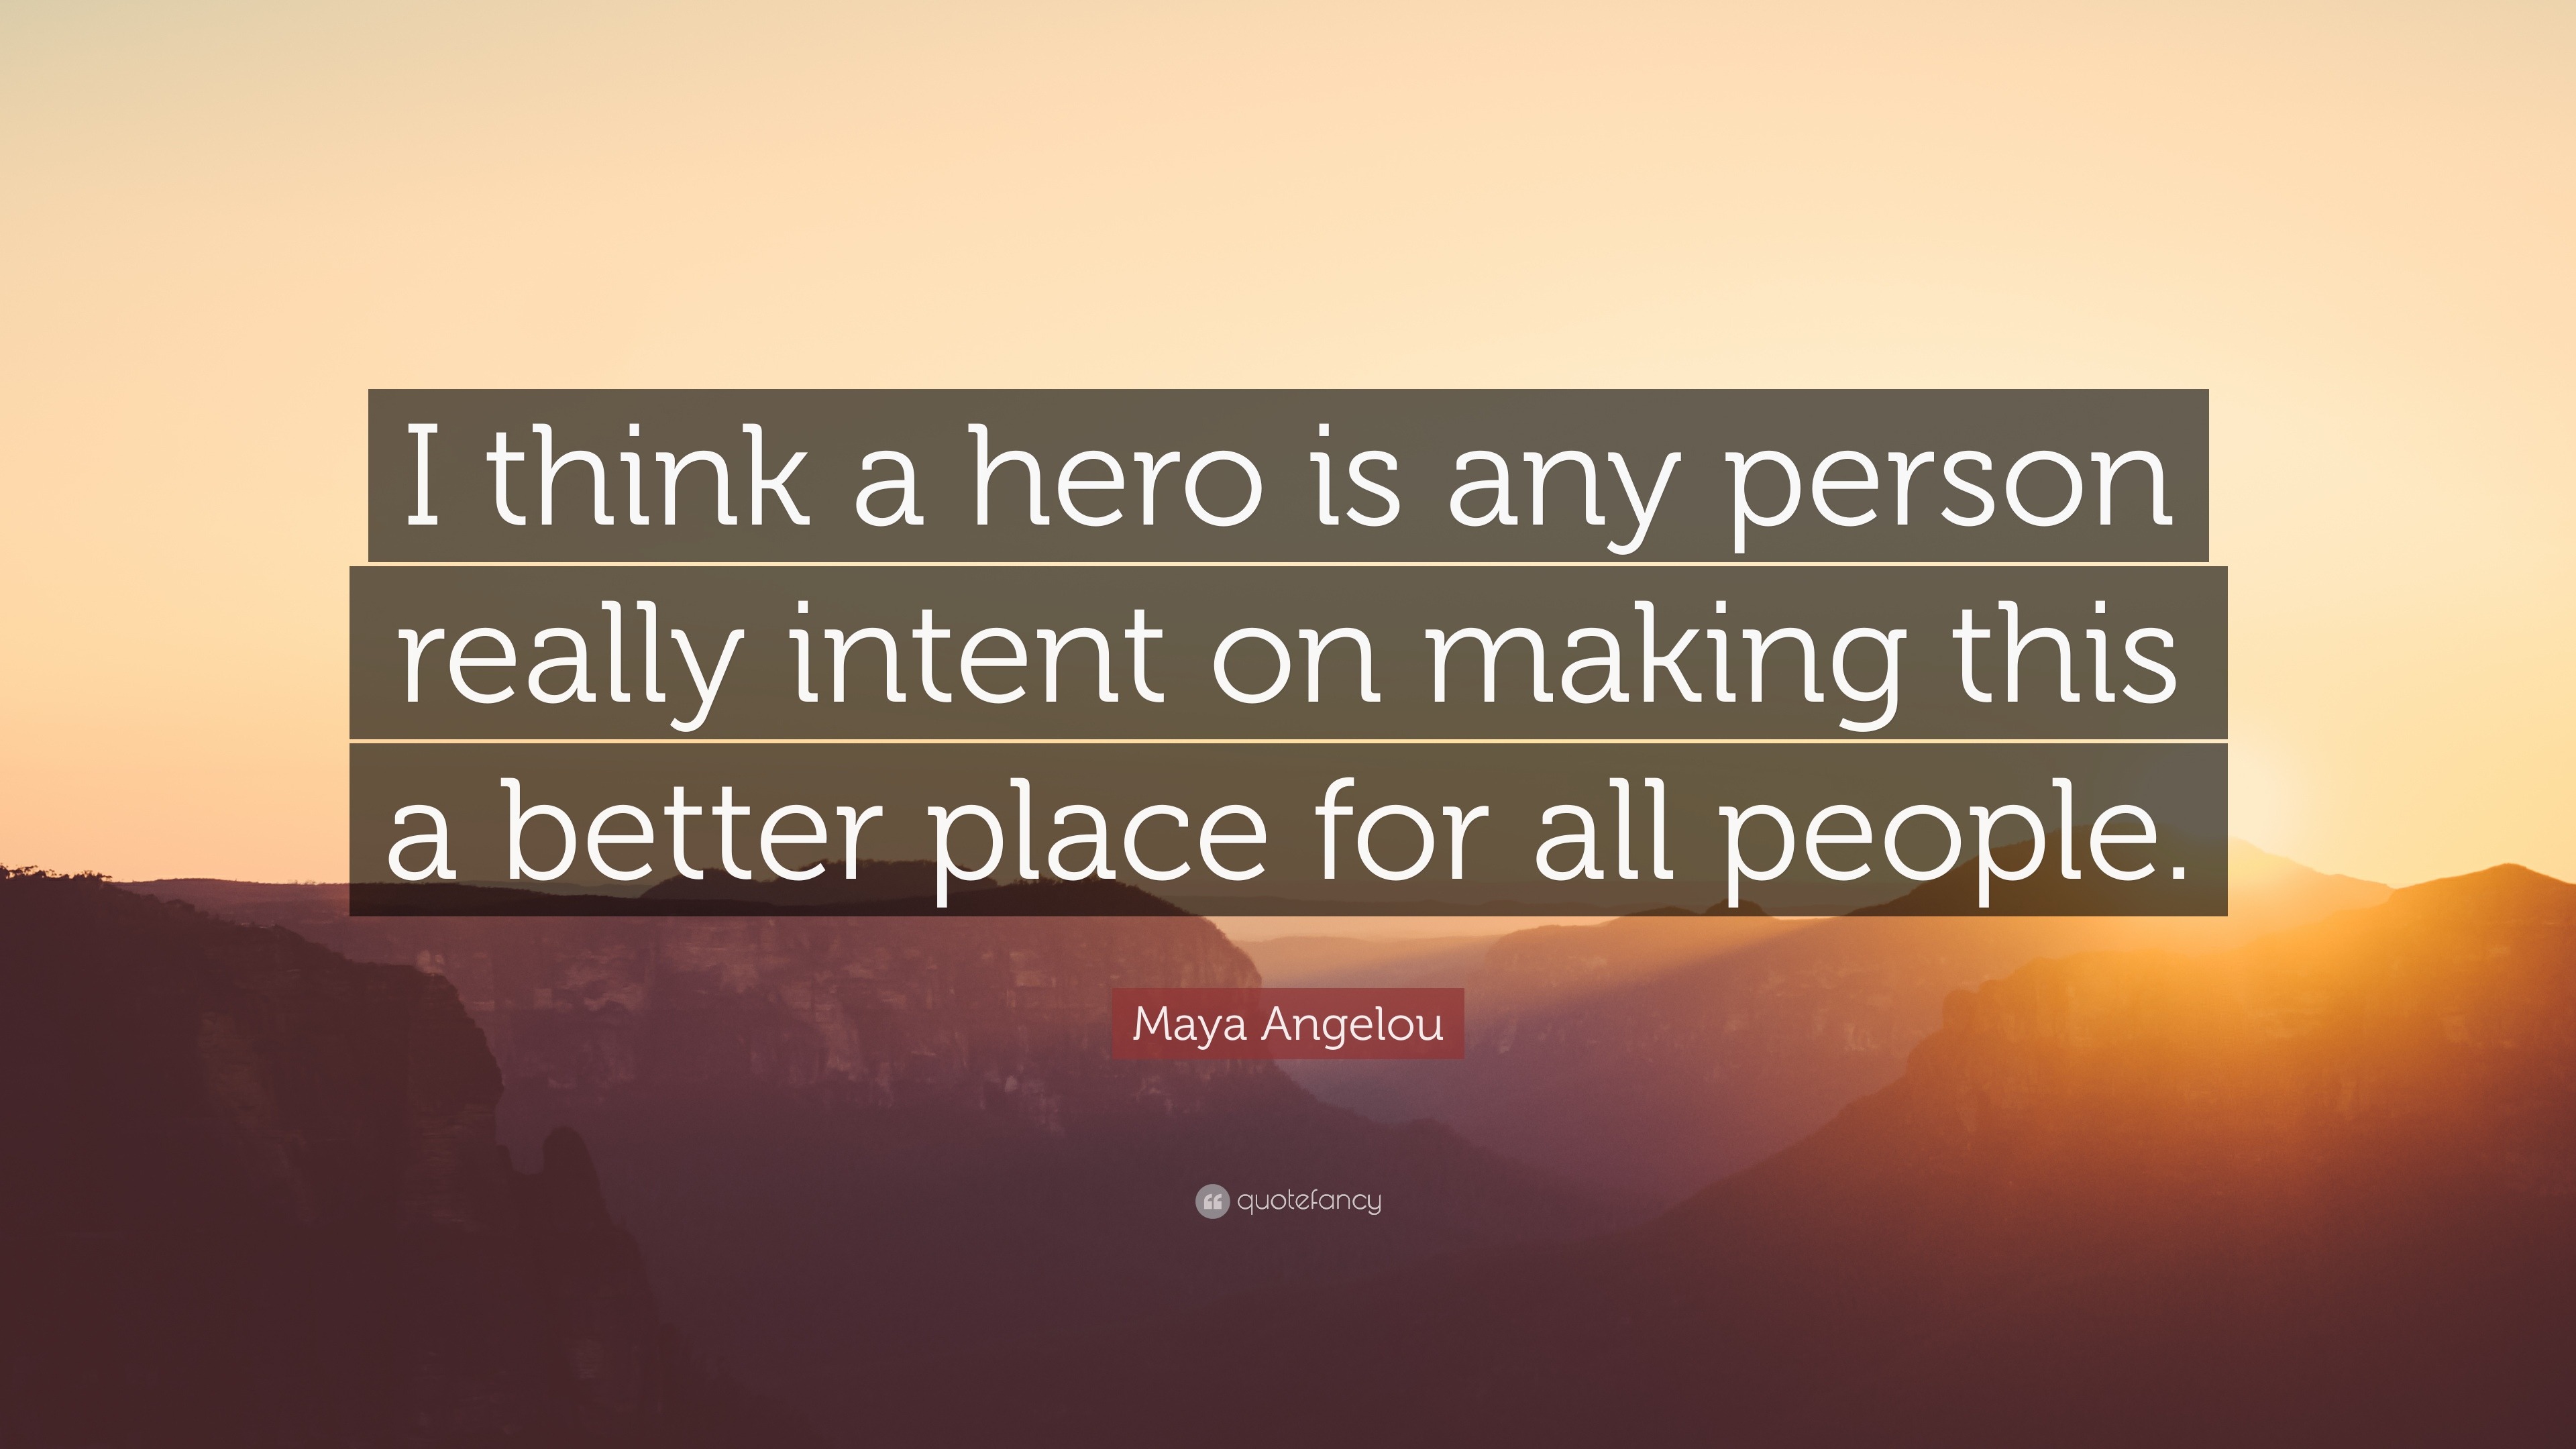 Maya Angelou Quote: “I think a hero is any person really intent on making this a better place